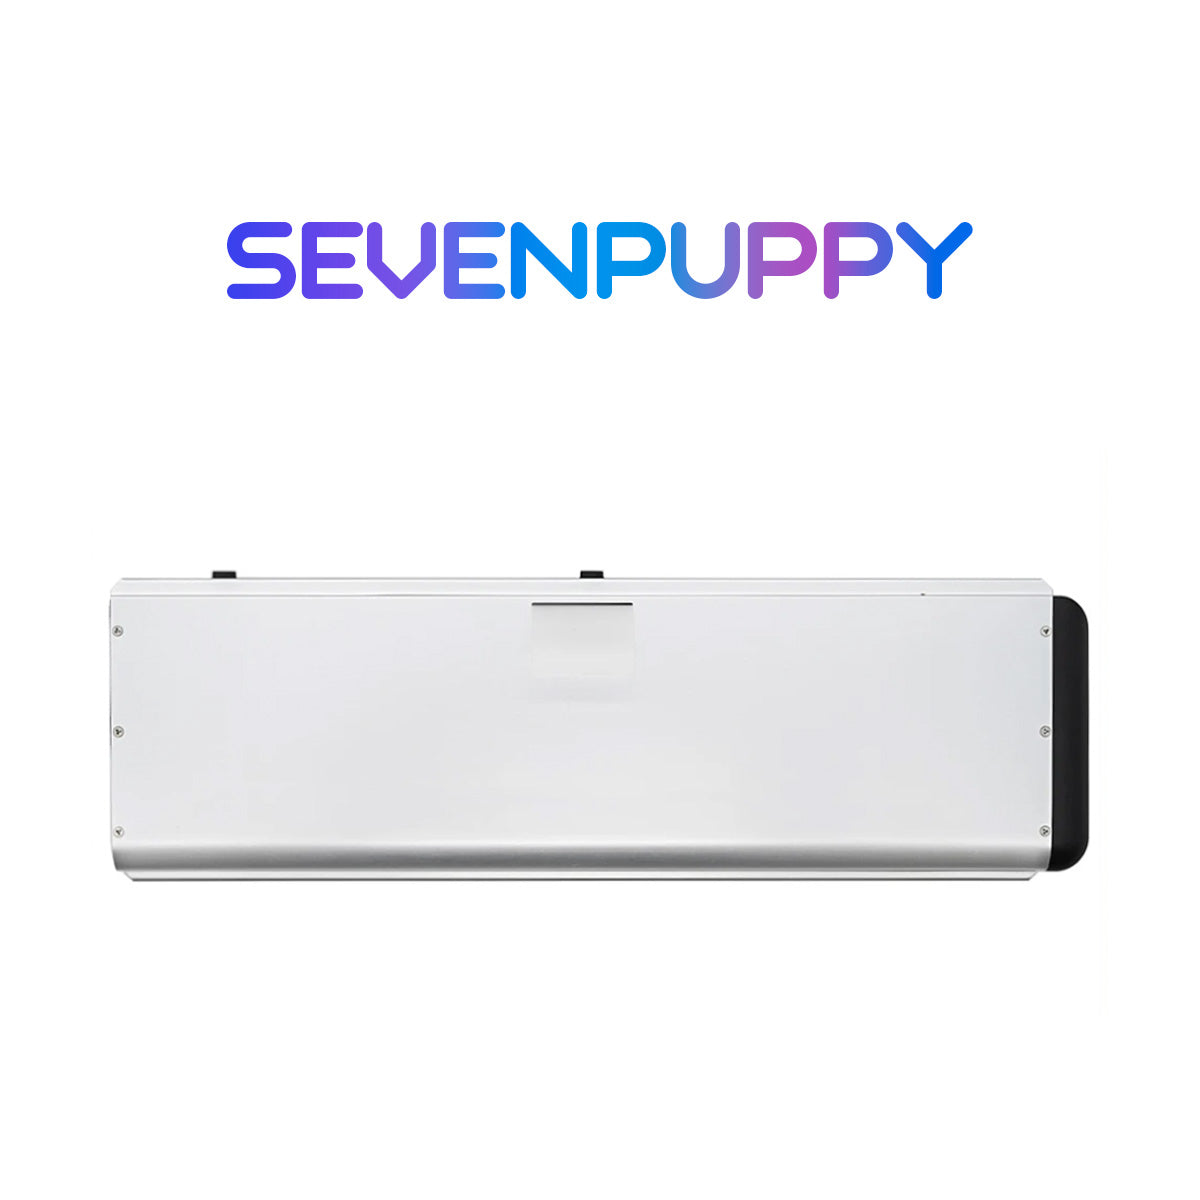 SEVEN PUPPY Brand NEW For Macbook Pro 15" A1281 A1286 2008-2010 Year Laptop Battery